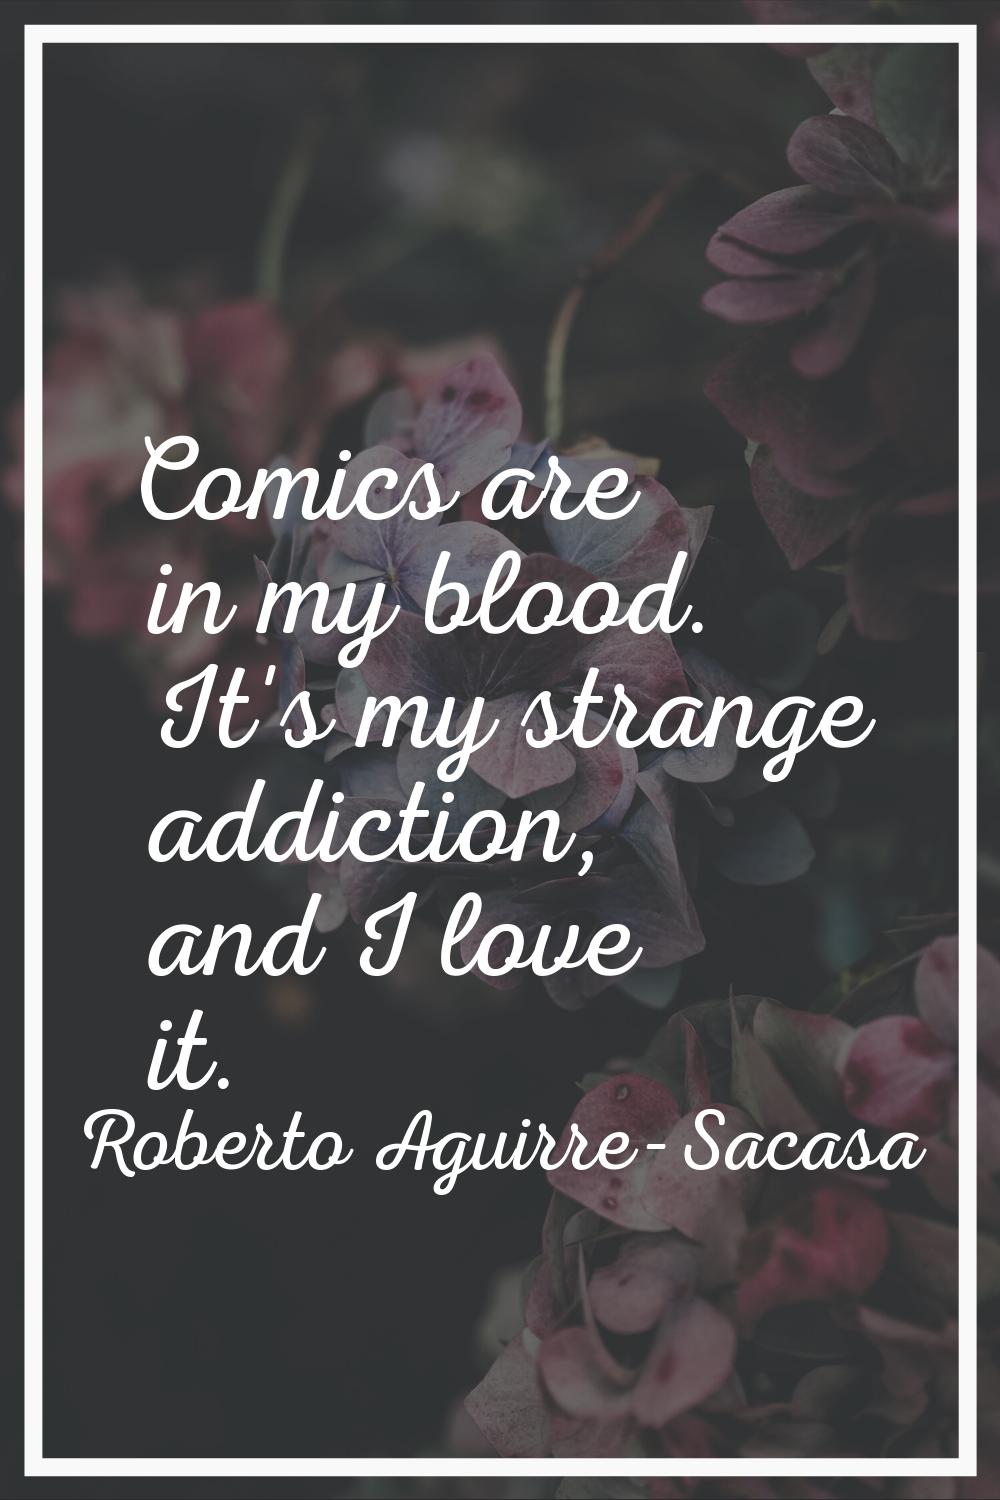 Comics are in my blood. It's my strange addiction, and I love it.